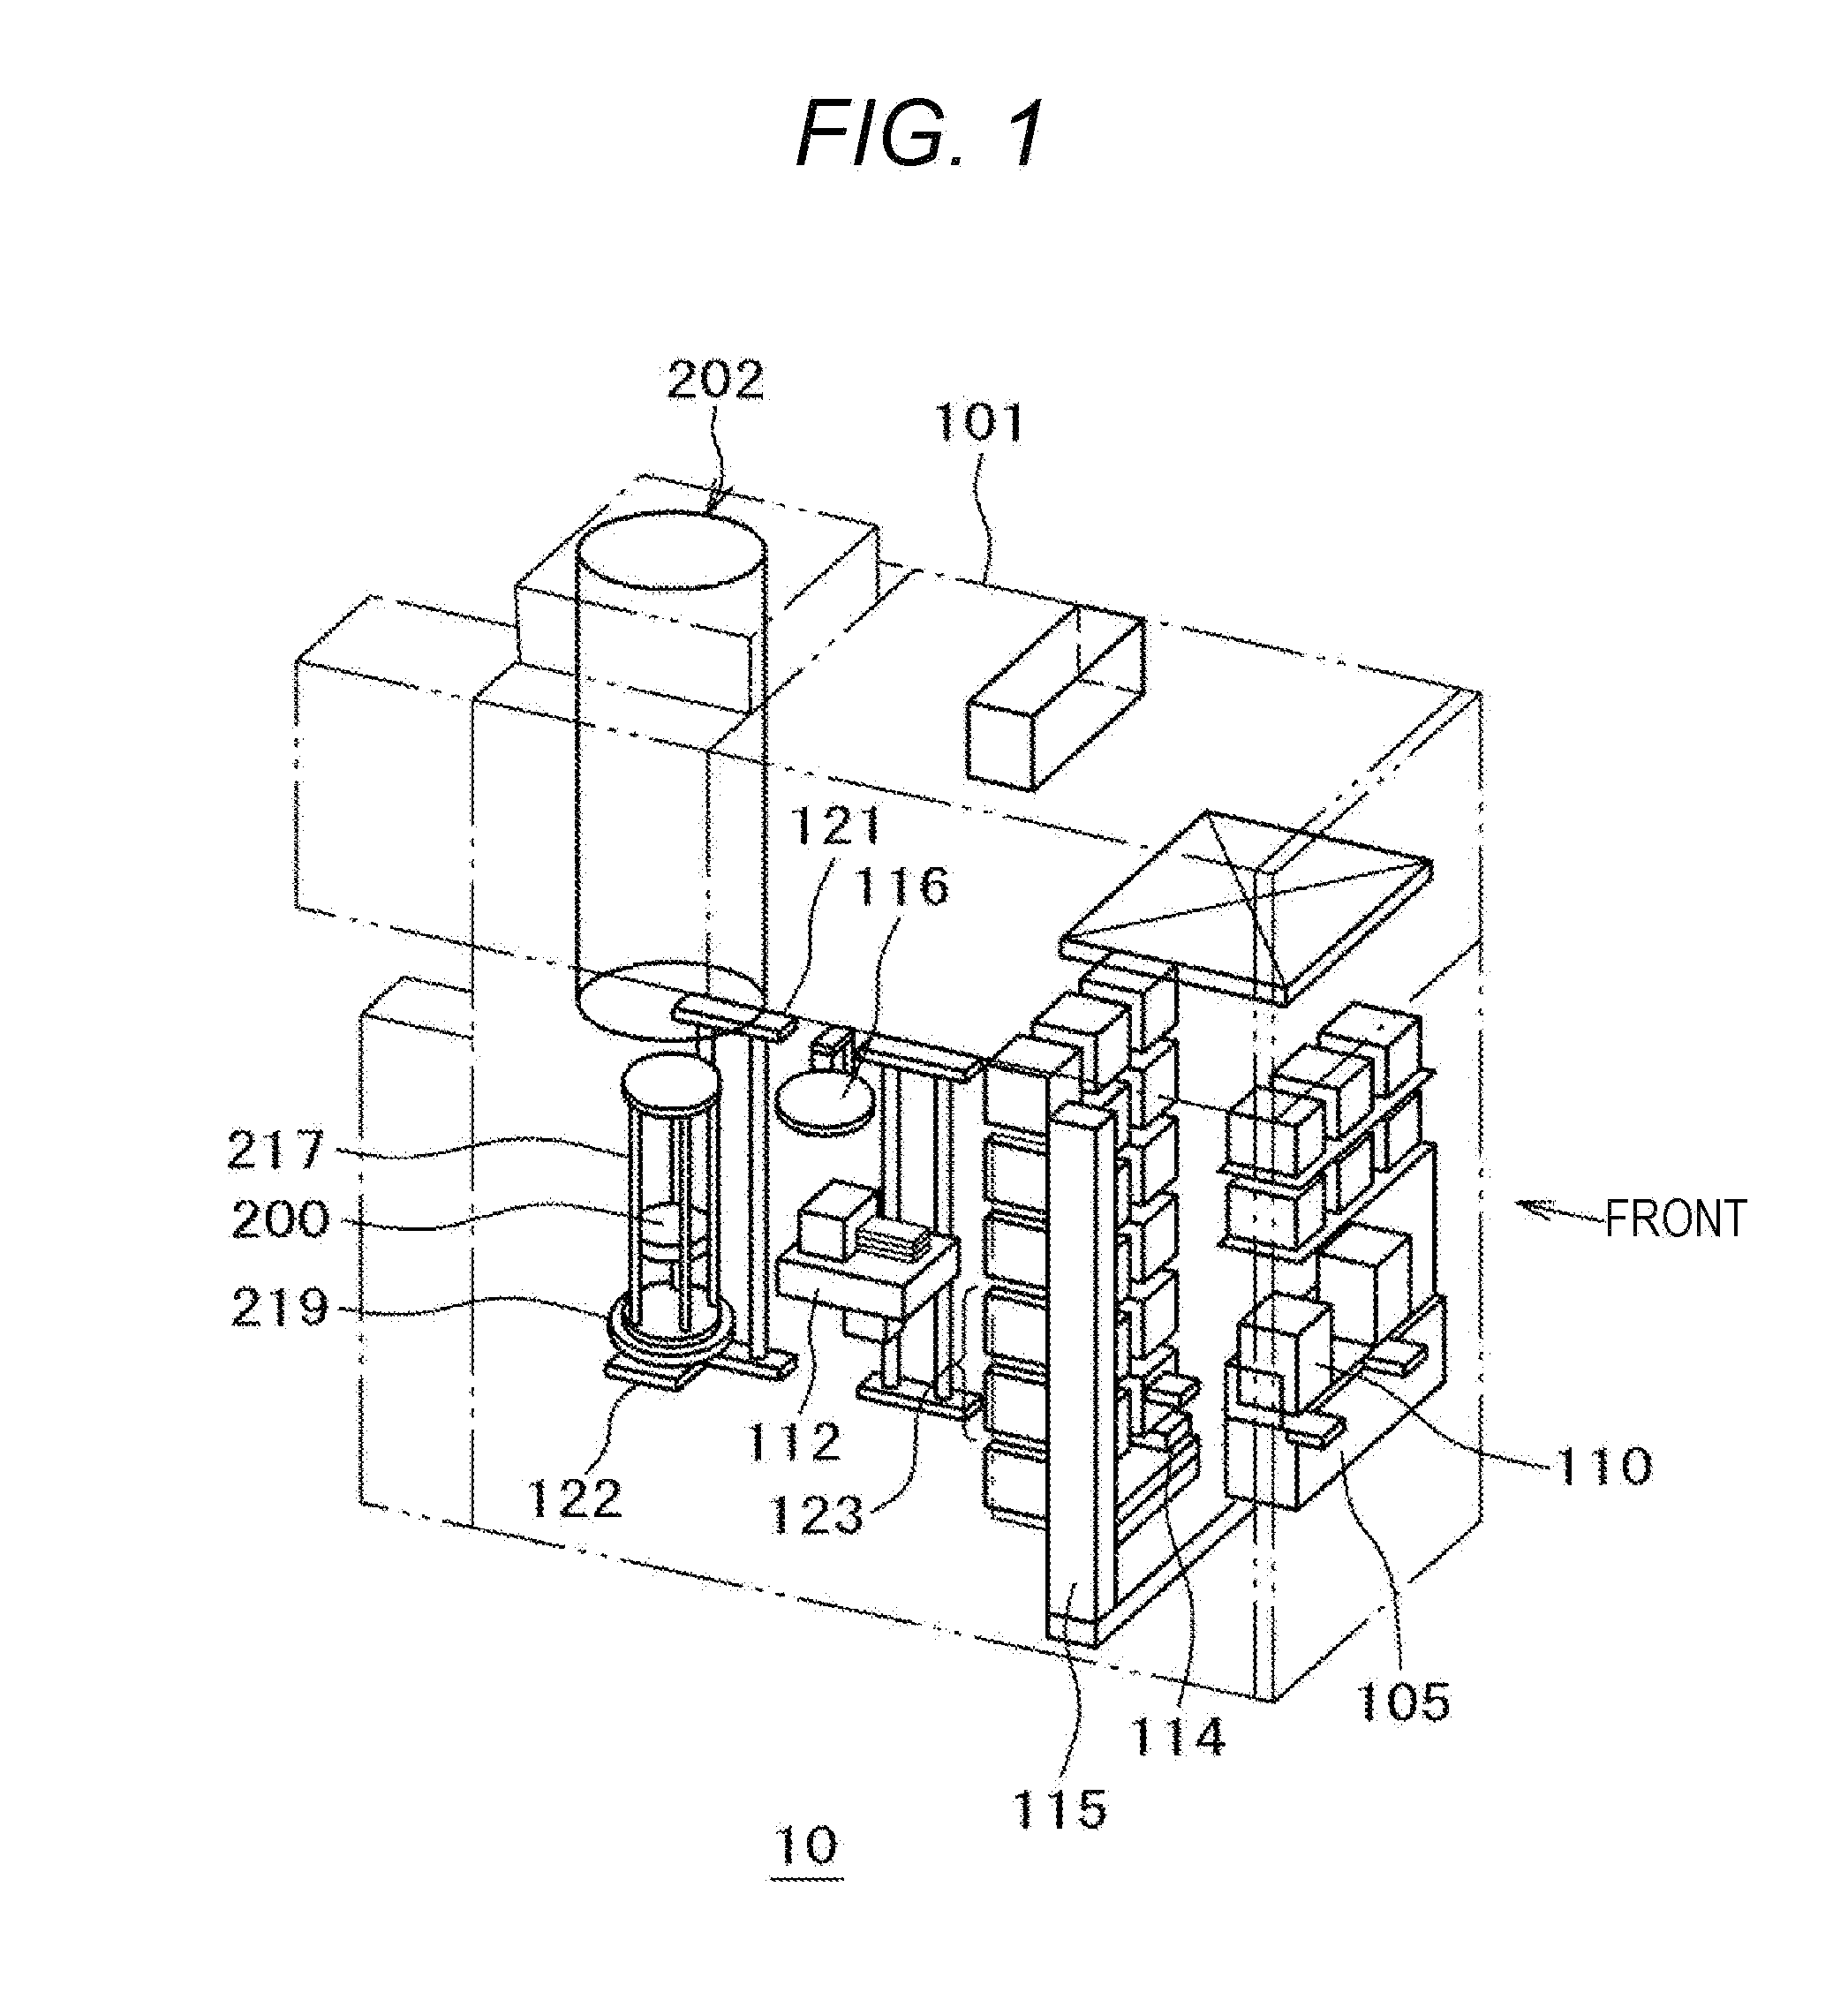 Substrate processing apparatus, method of manufacturing semiconductor device, and thermocouple support